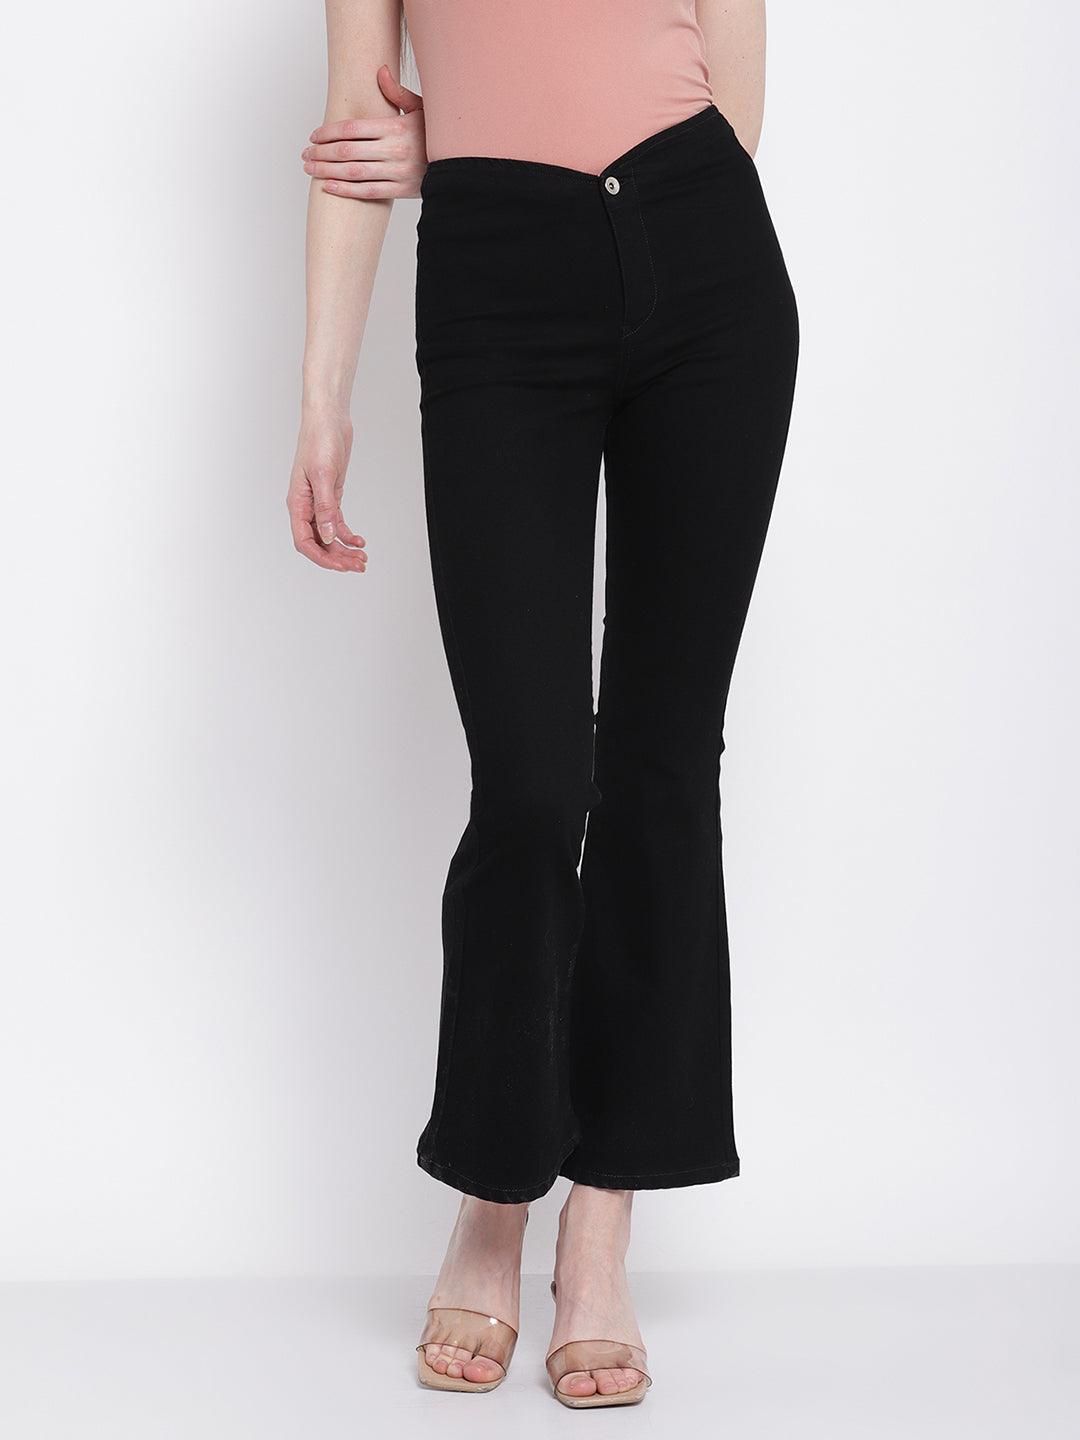 Bell Bottom Jeans for Women High Waisted Buttons Black Classic Flared Jean  Pants with Belt at  Women's Jeans store